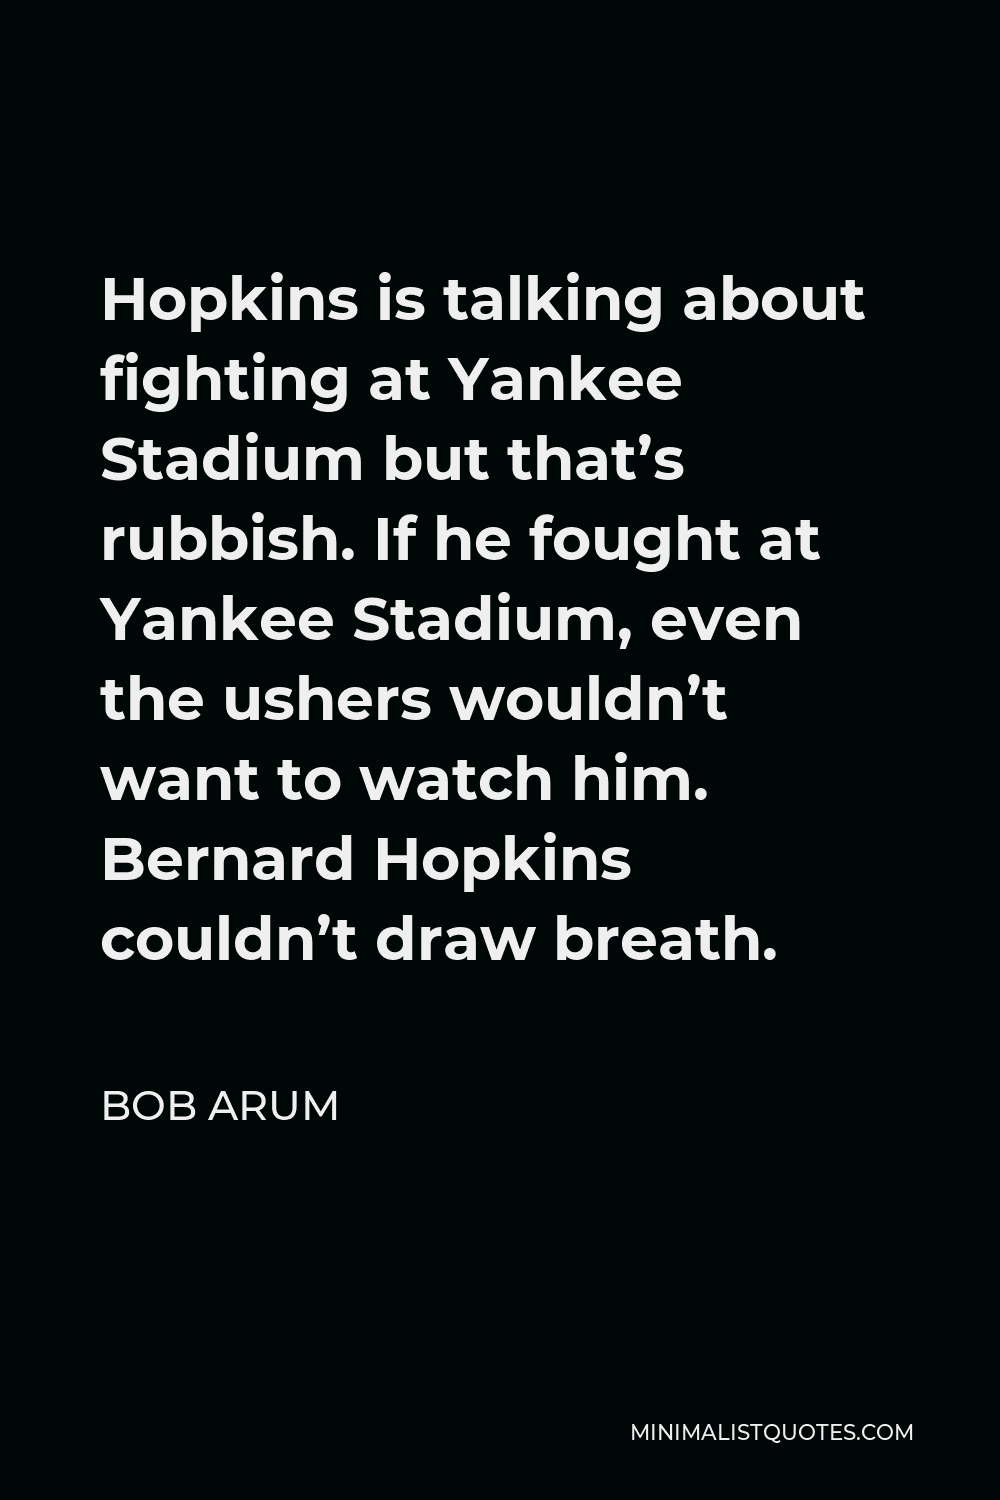 Bob Arum Quote - Hopkins is talking about fighting at Yankee Stadium but that’s rubbish. If he fought at Yankee Stadium, even the ushers wouldn’t want to watch him. Bernard Hopkins couldn’t draw breath.